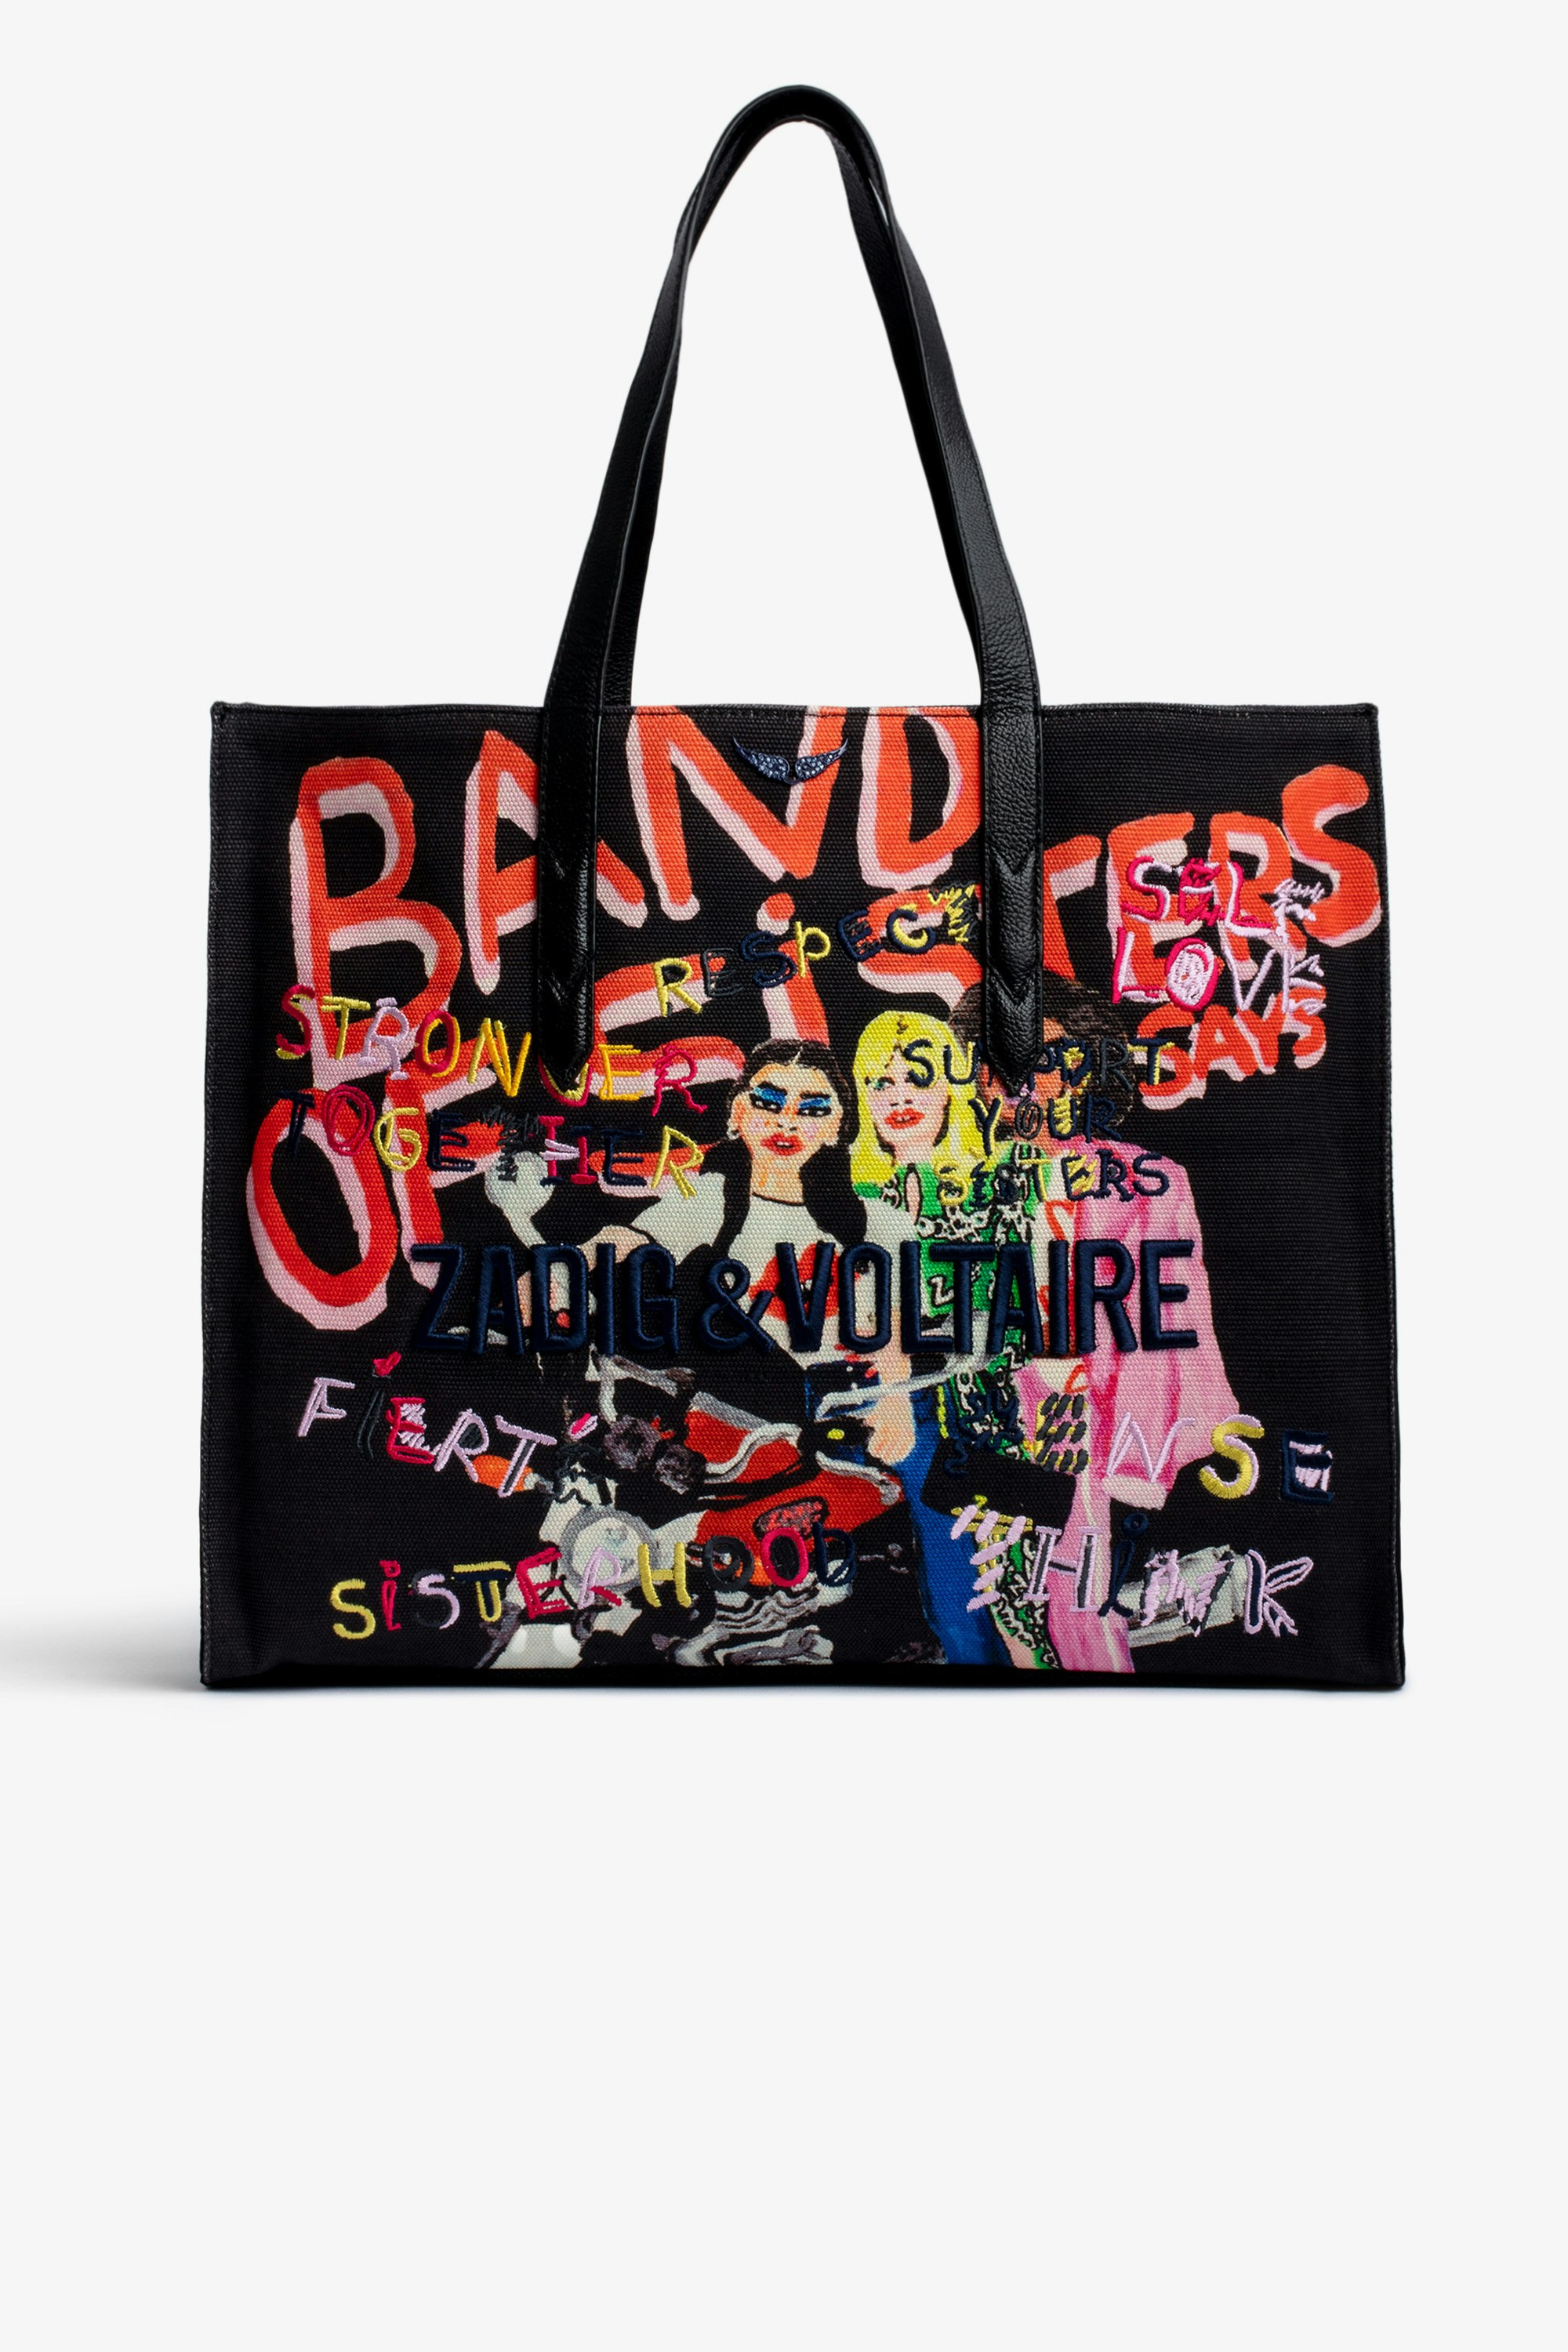 Band of Sisters le Tote バッグ Women’s Band Of Sisters black cotton Le Tote bag